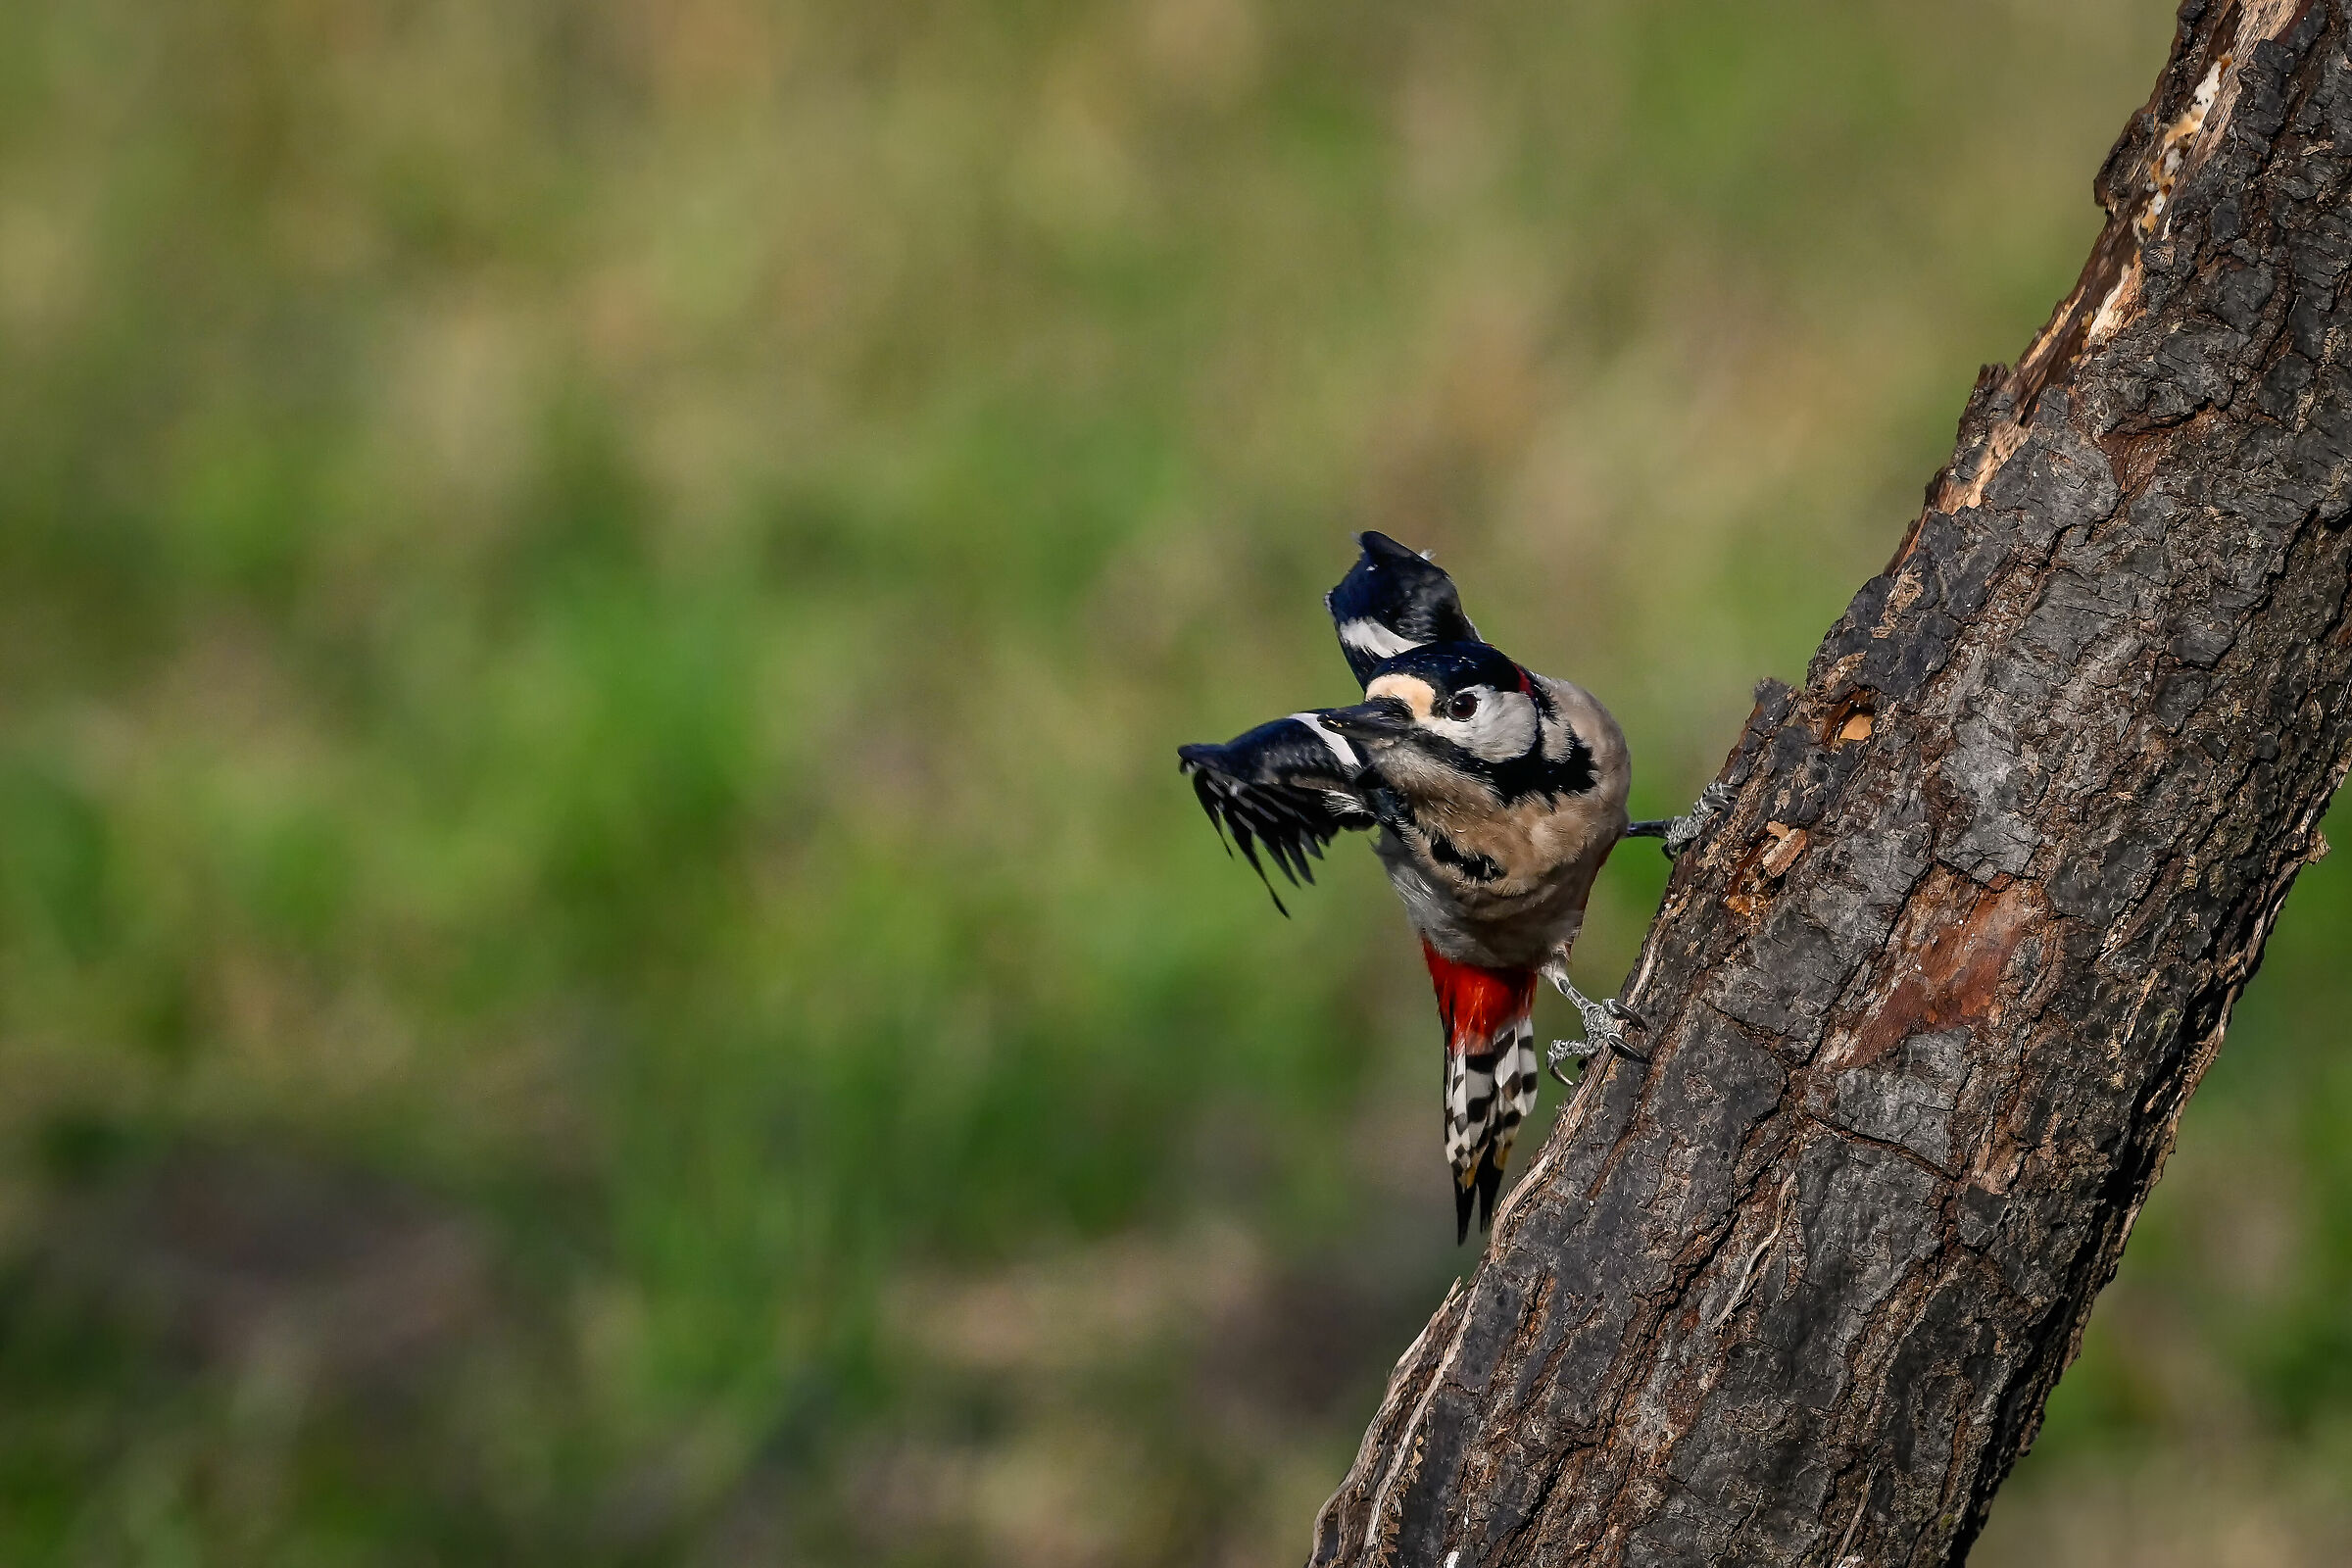 Spotted woodpecker #capannocora "ready to go"...